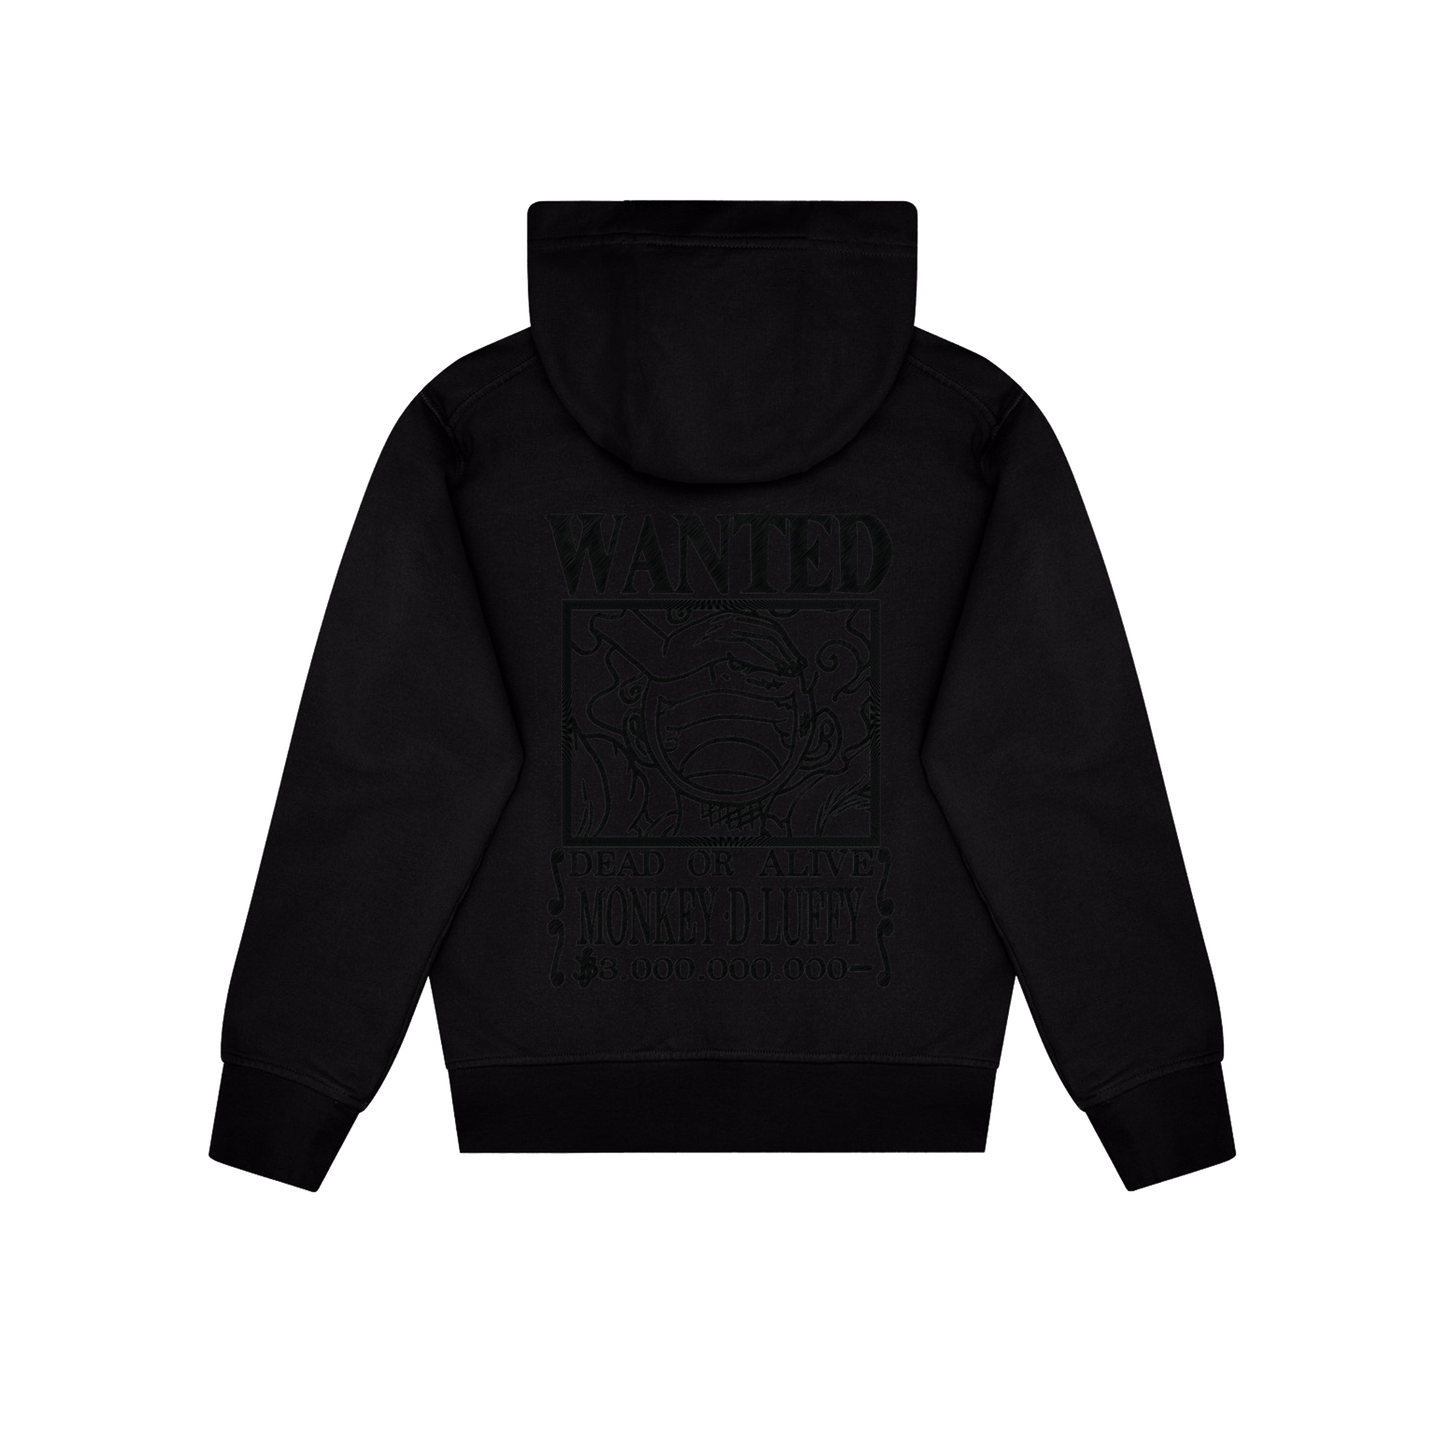 Blackout Wanted Hoodie